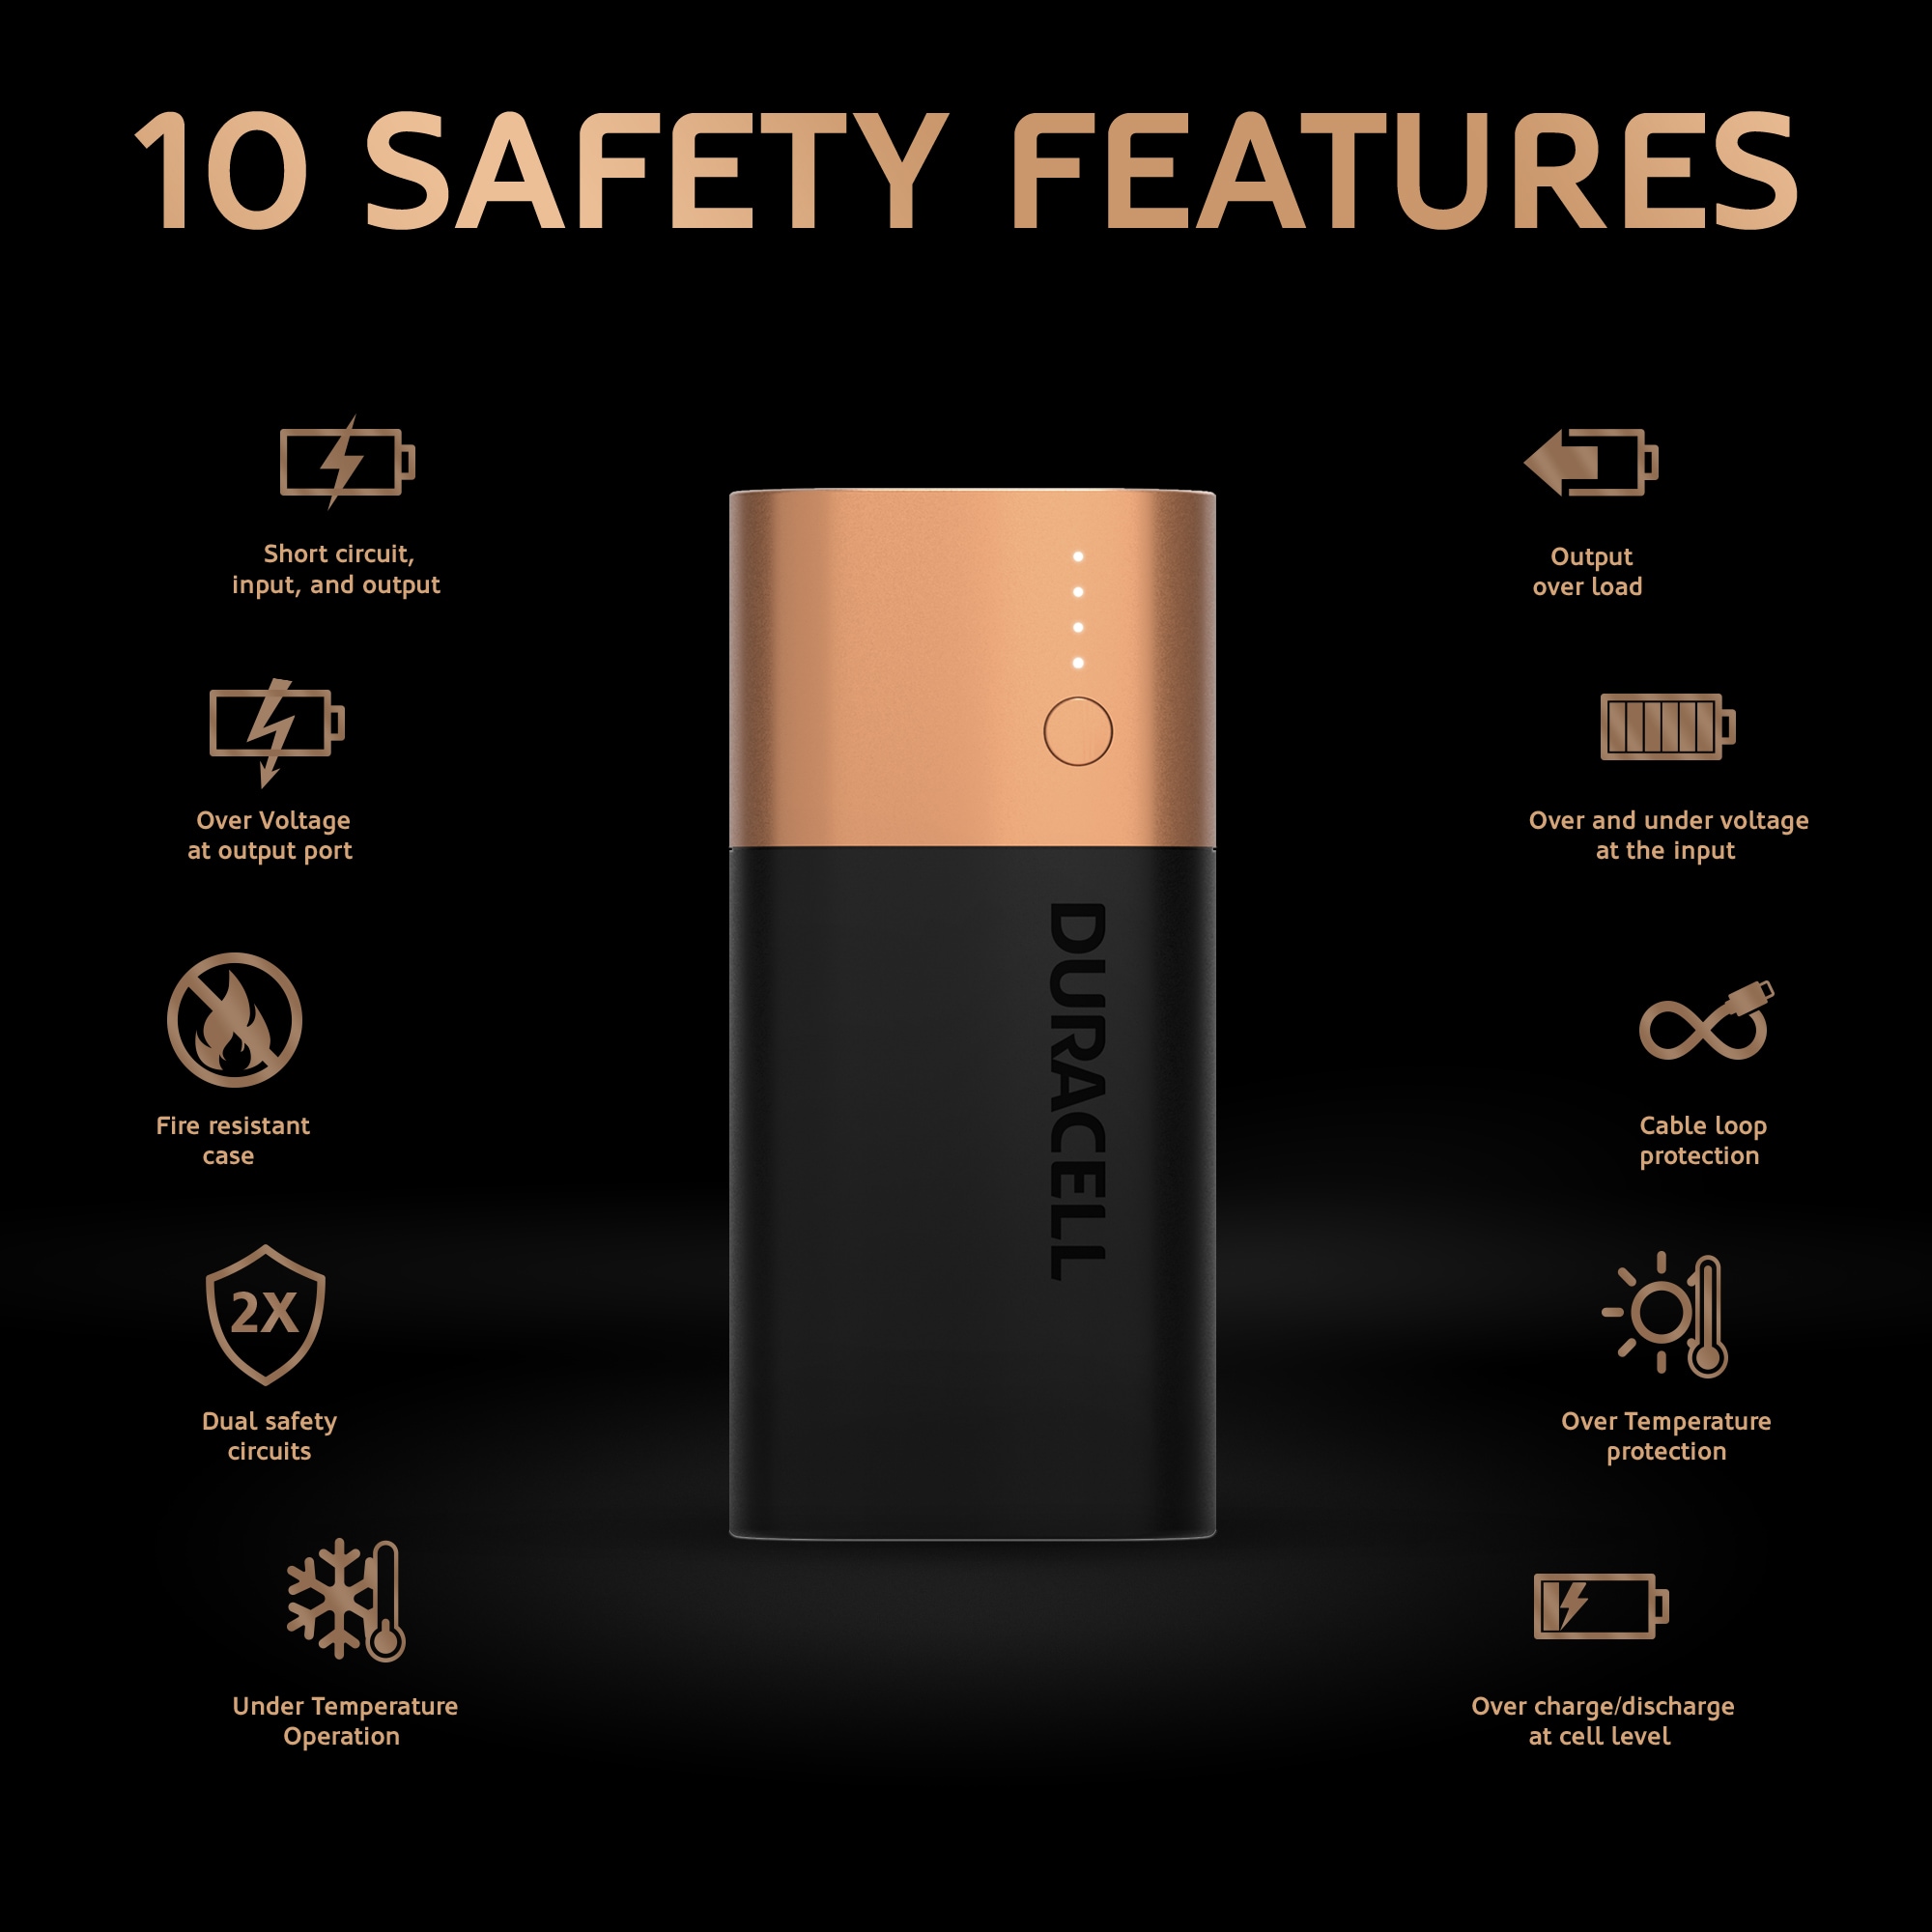 Duracell Rechargeable Power Bank (6700mAh) - Black, 2 Day Portable Charger, Dual Charge Technology, Micro USB Connector